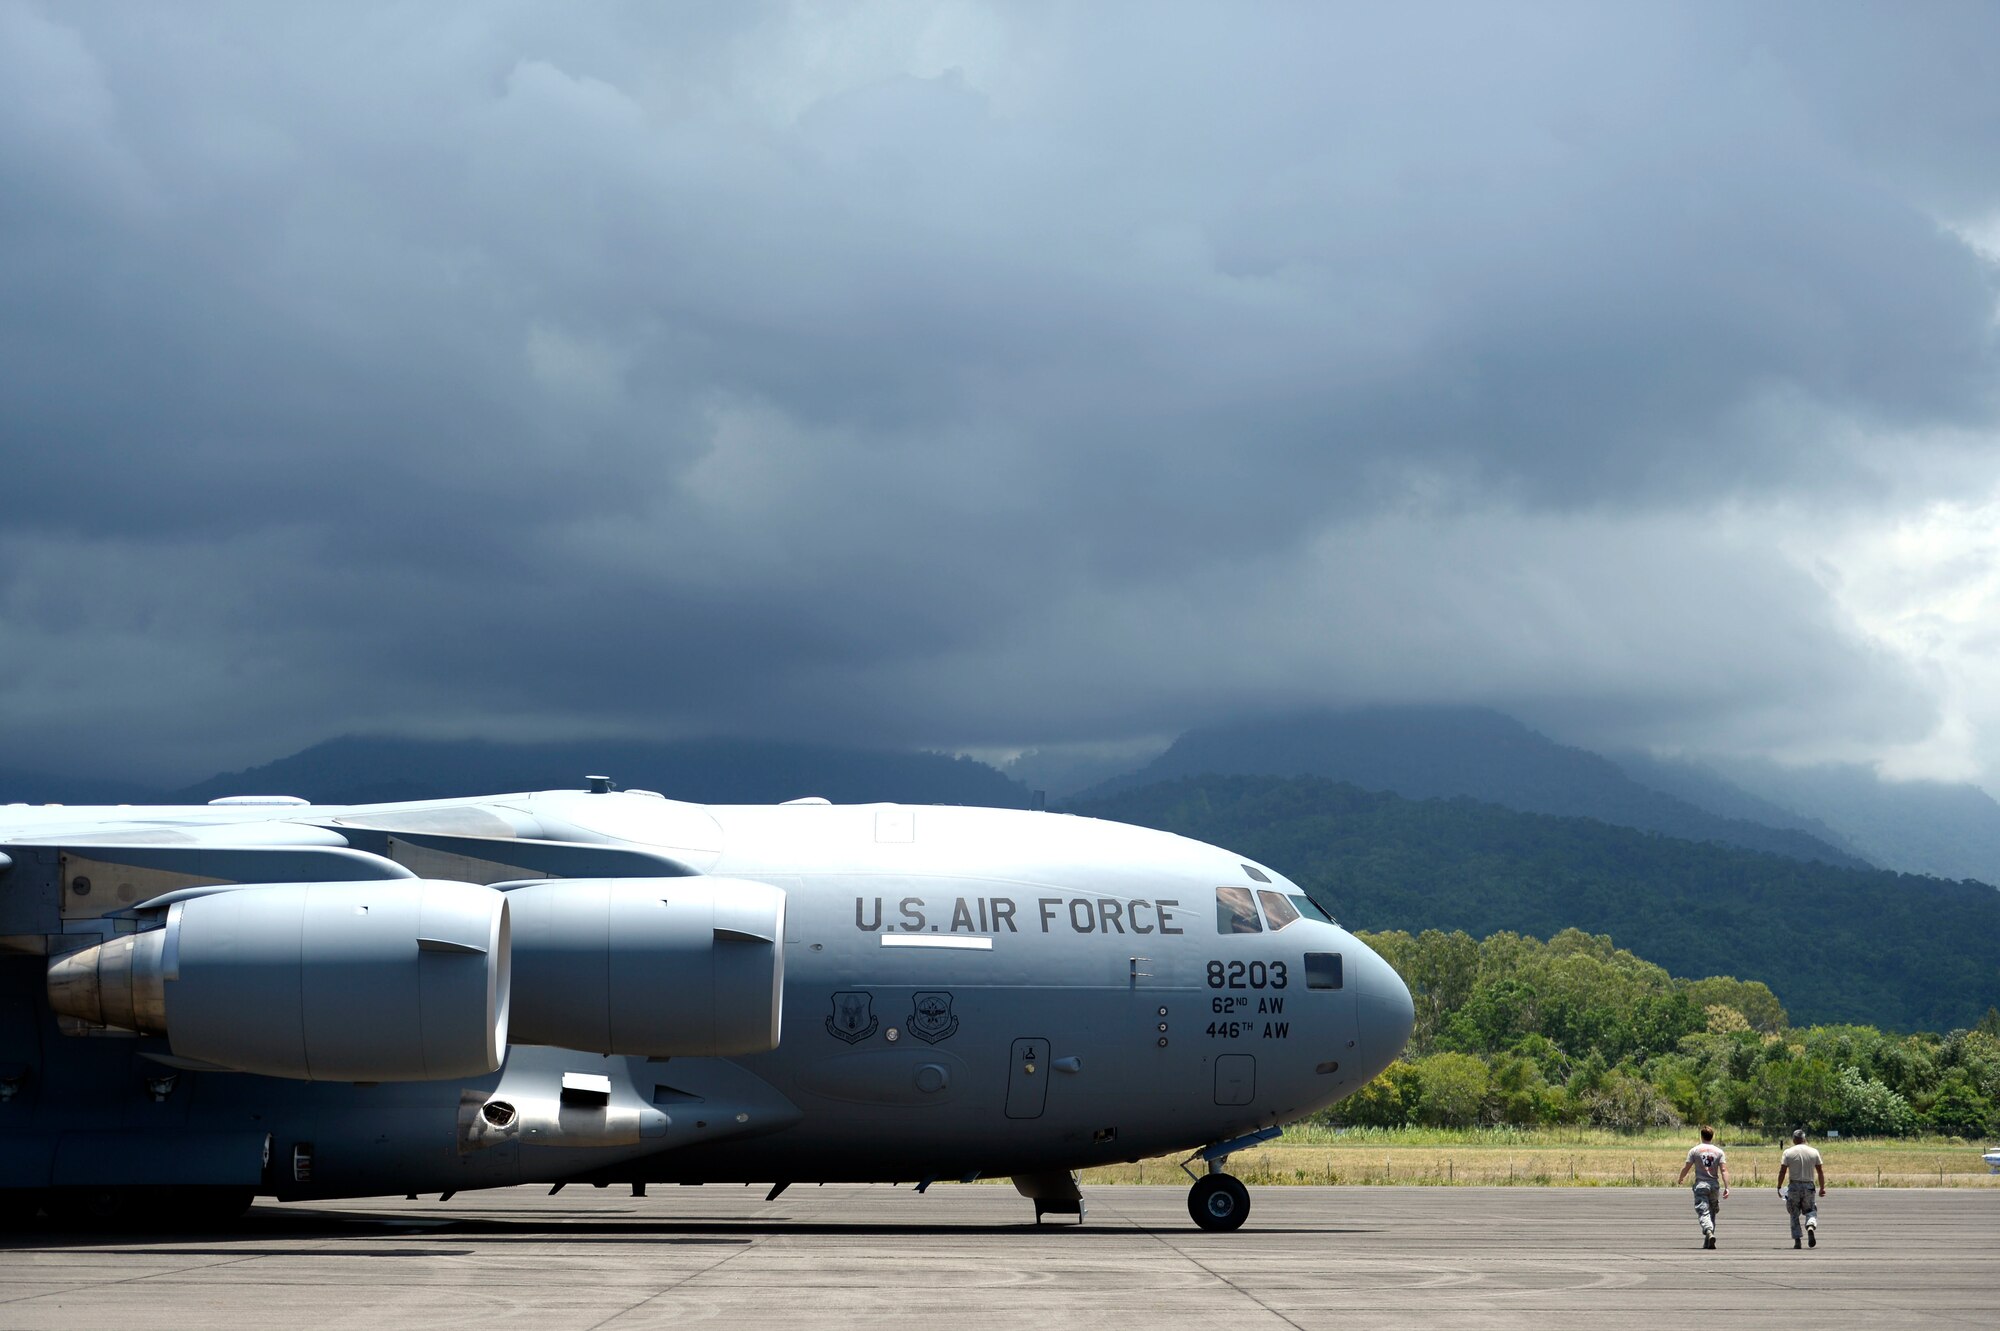 New Horizons Honduras 2015 training exercise personnel approach a waiting C-17 Globemaster III from the 62nd Airlift Wing out of Joint Base Lewis-McChord, Wash., Base Aerea Coronel Hector Caraccioli Moncada in La Ceiba, Honduras, Aug. 28, 2015, on its way to Hurlburt Field, Fla. Vehicles, equipment and personnel from New Horizons redeployed to Hurlburt Field while remaining equipment will be transported via sealift. New Horizons was launched in the 1980s and is an annual joint humanitarian assistance exercise that U.S. Southern Command conducts with a partner nation in Central America, South America or the Caribbean. The exercise improves joint training readiness of U.S. and partner nation civil engineers, medical professionals and support personnel through humanitarian assistance activities. (U.S. Air Force photo by Capt. David J. Murphy/Released)